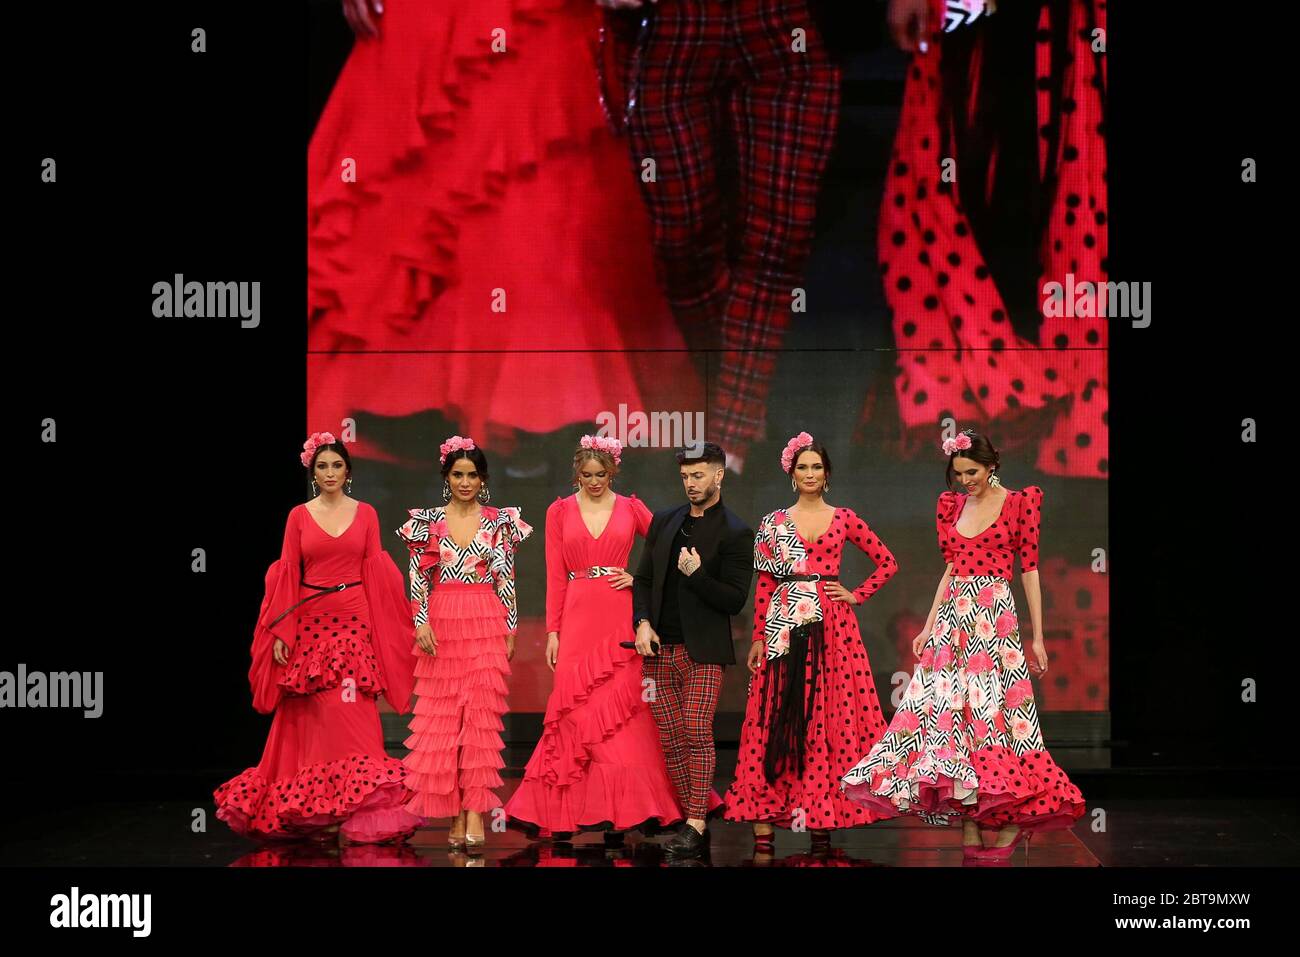 SEVILLA, SPAIN - JAN 31: Singer Rasel and models wearing dresses from the Dualismo collection by designer Adelina Infante as part of the SIMOF 2020 (Photo credit: Mickael Chavet) Stock Photo